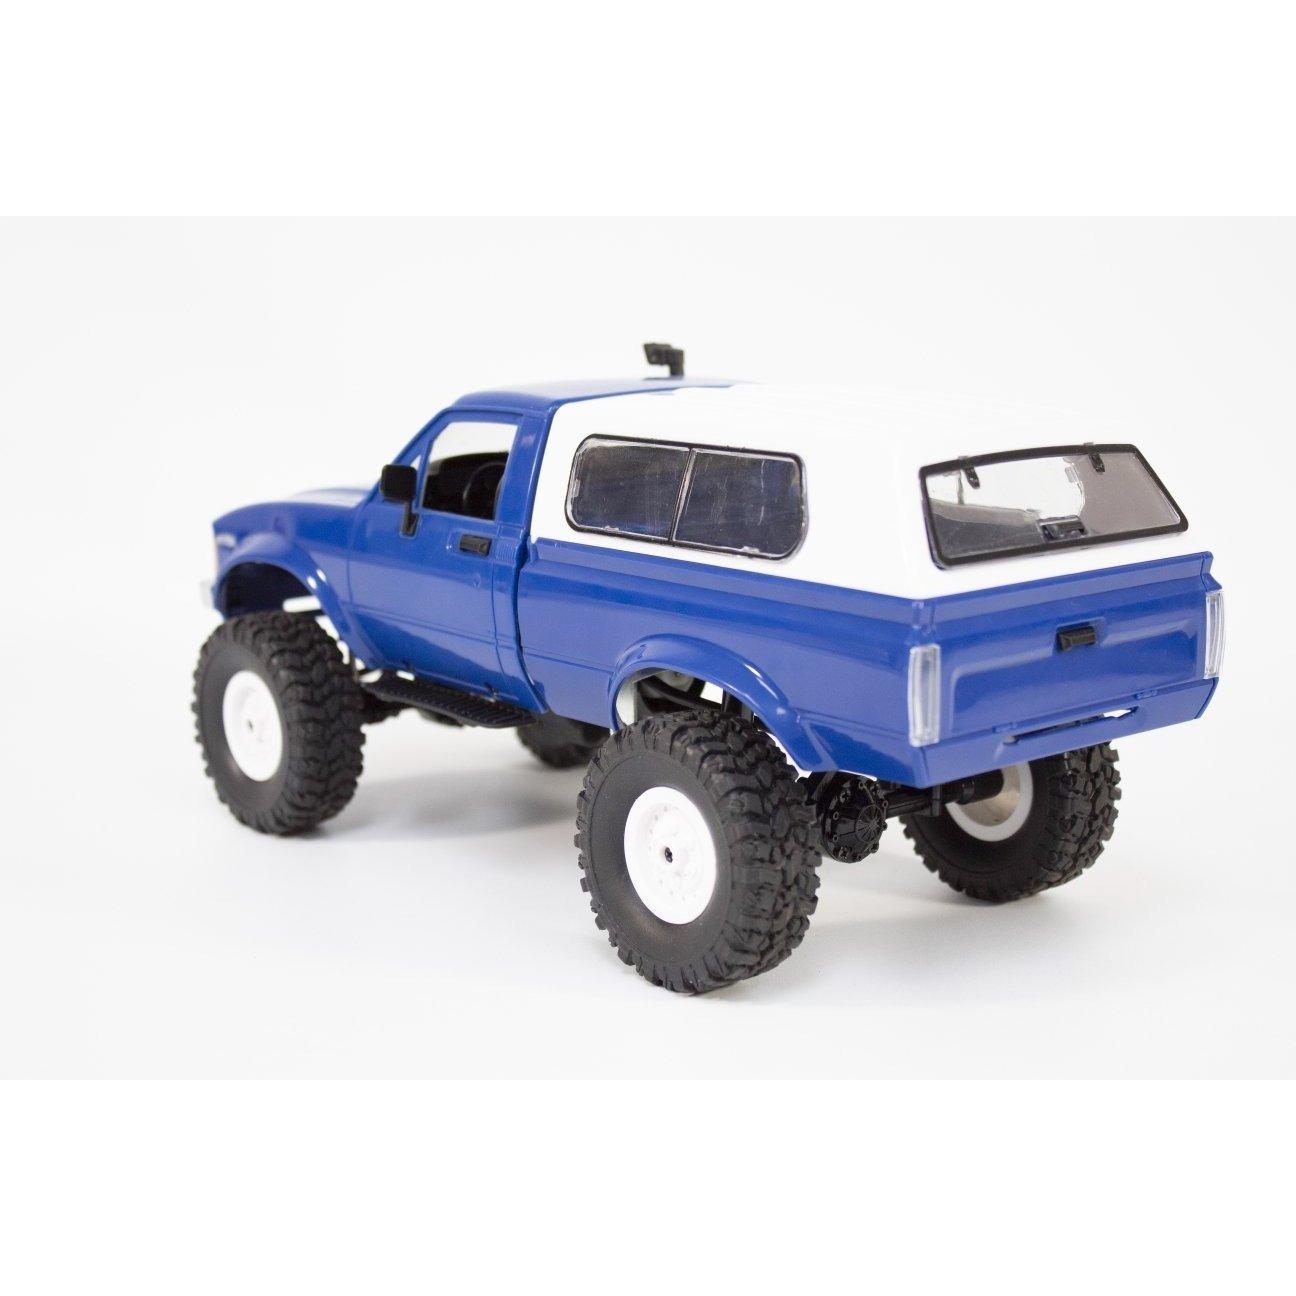 Hilux 4x4 1:16th Scale KIT RC Truck